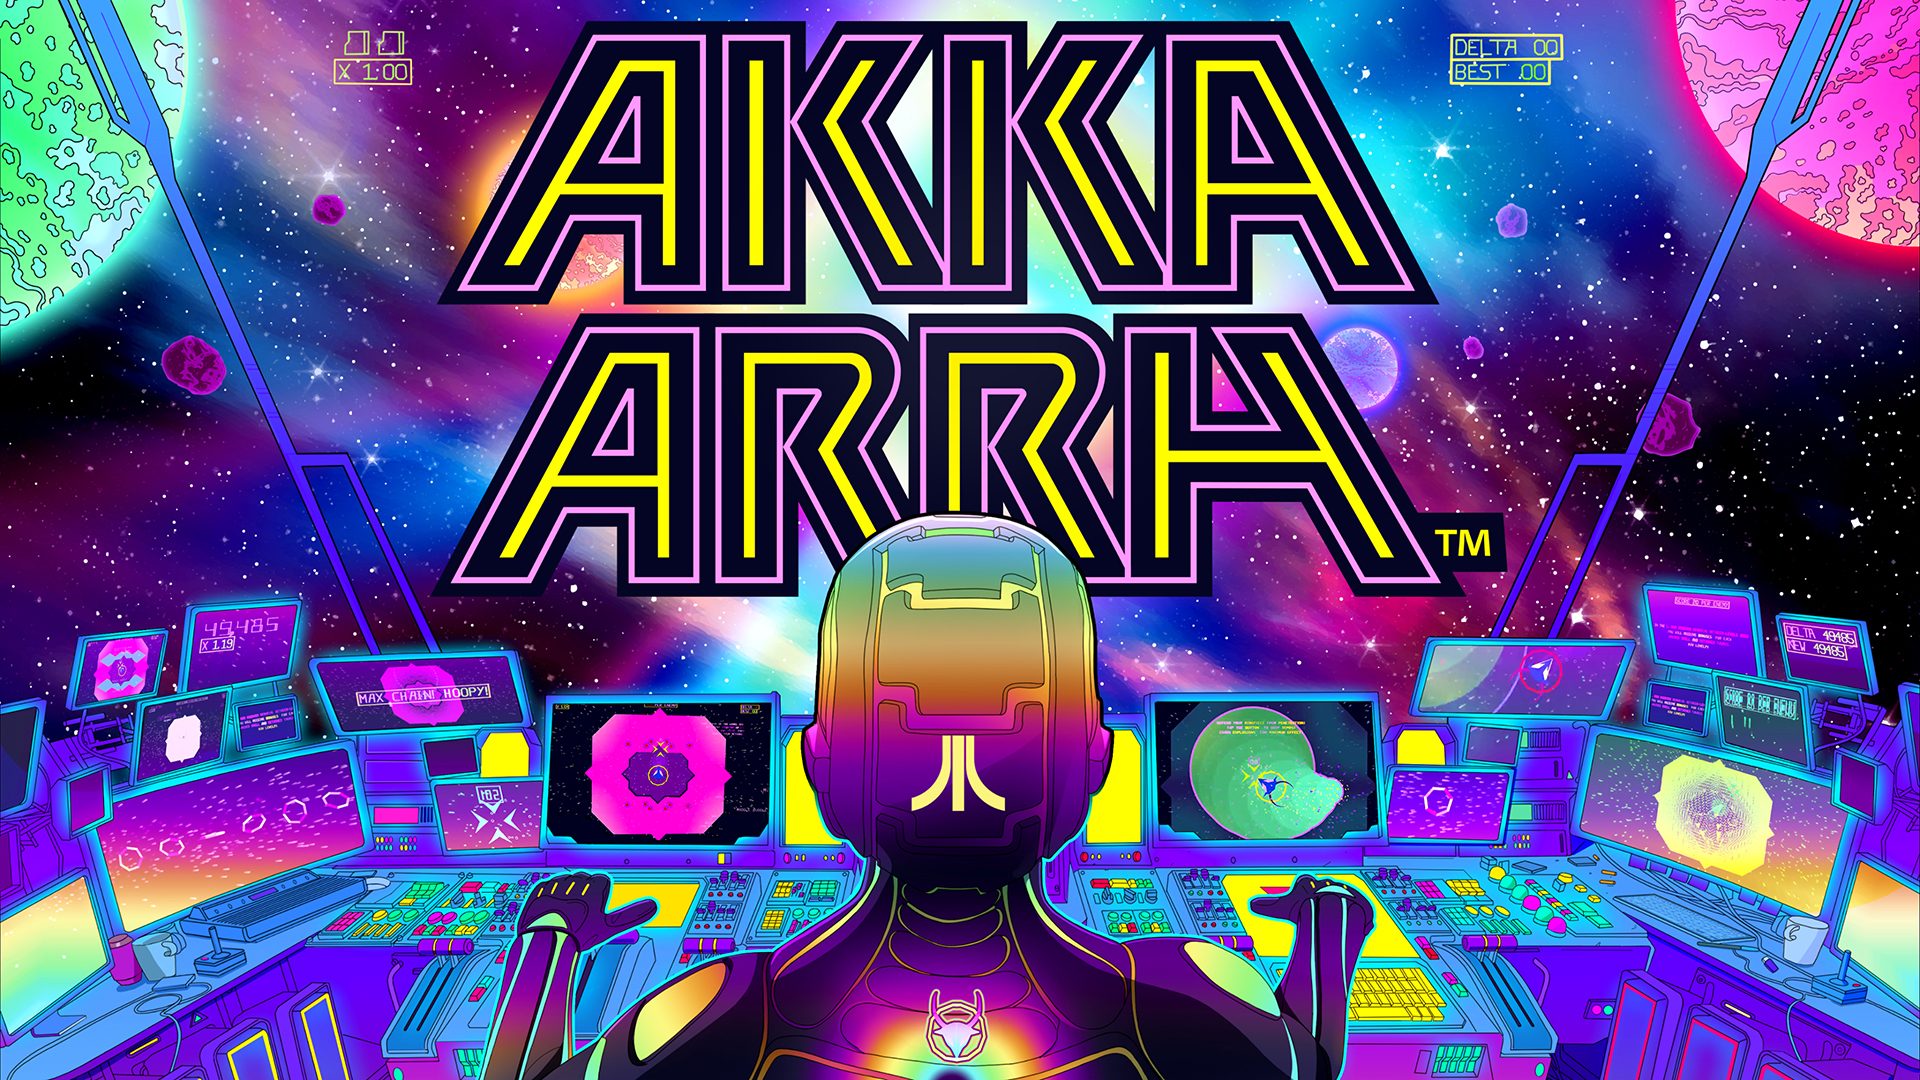 Jeff Minter interview: the legendary game designer on his upcoming PS4 & PS5 arcade title Akka Arrh